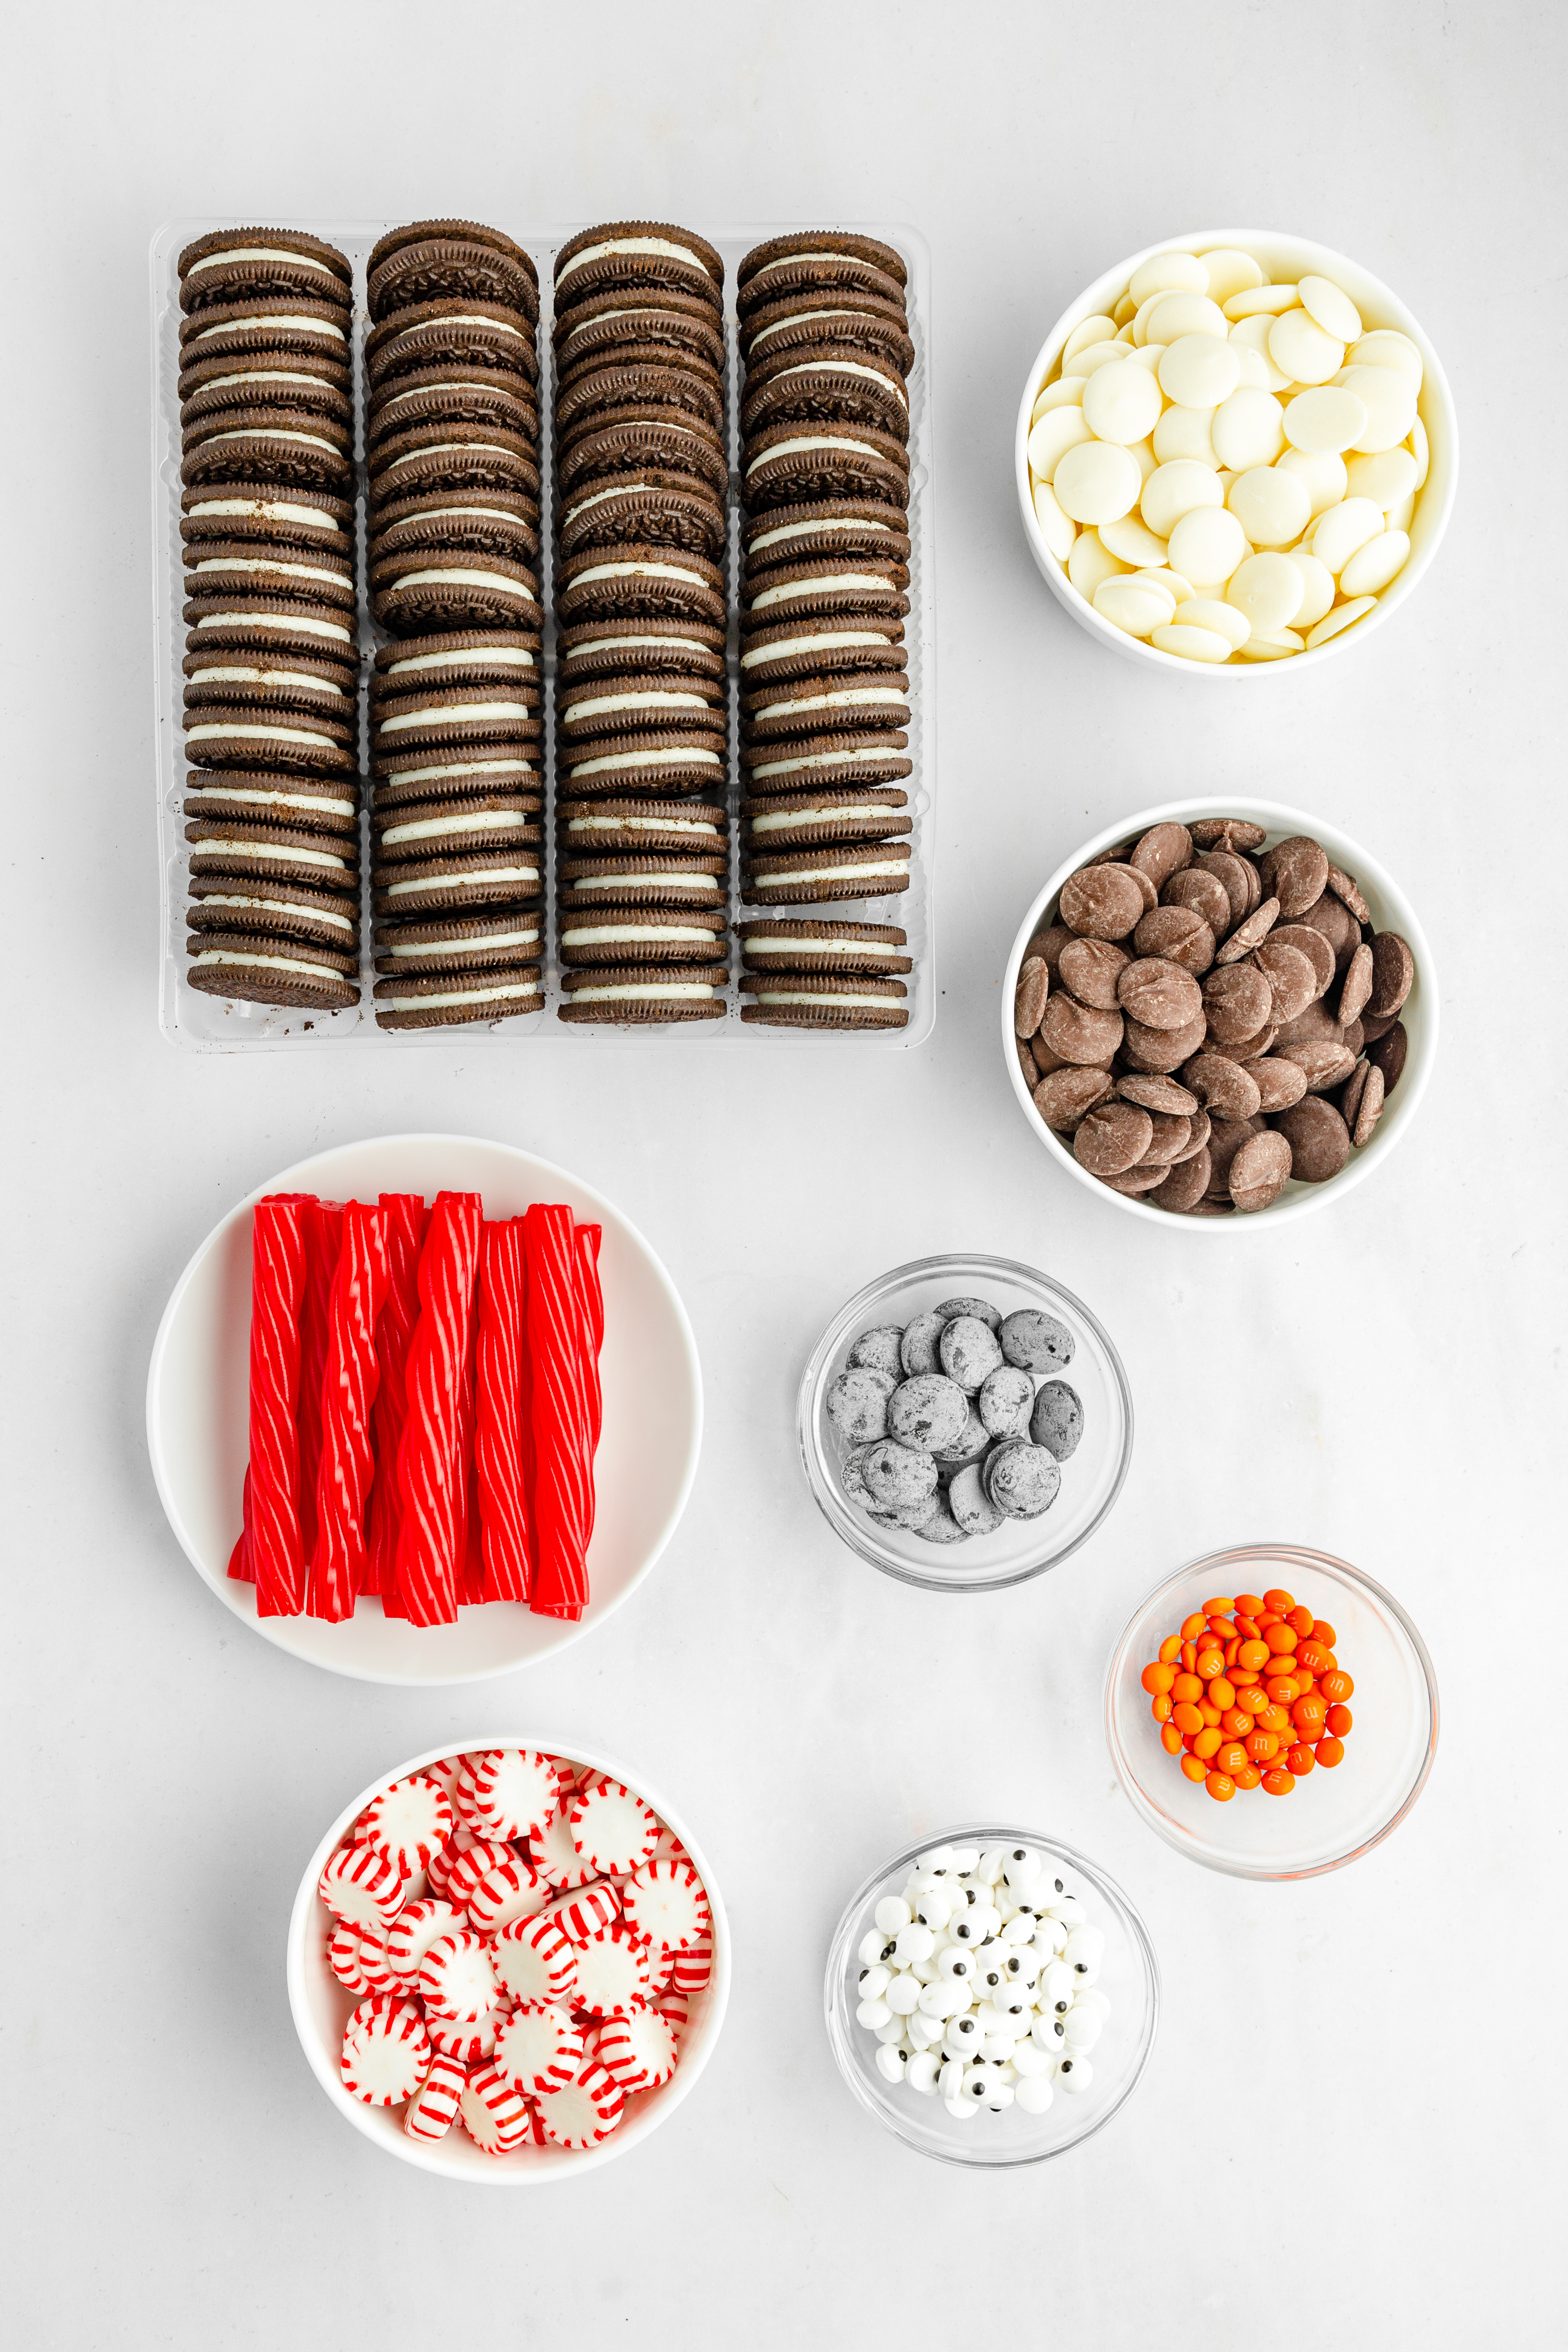 Oreos, white chocolate, chocolate candy melts, candy eyes, peppermints, and licorice on white counter